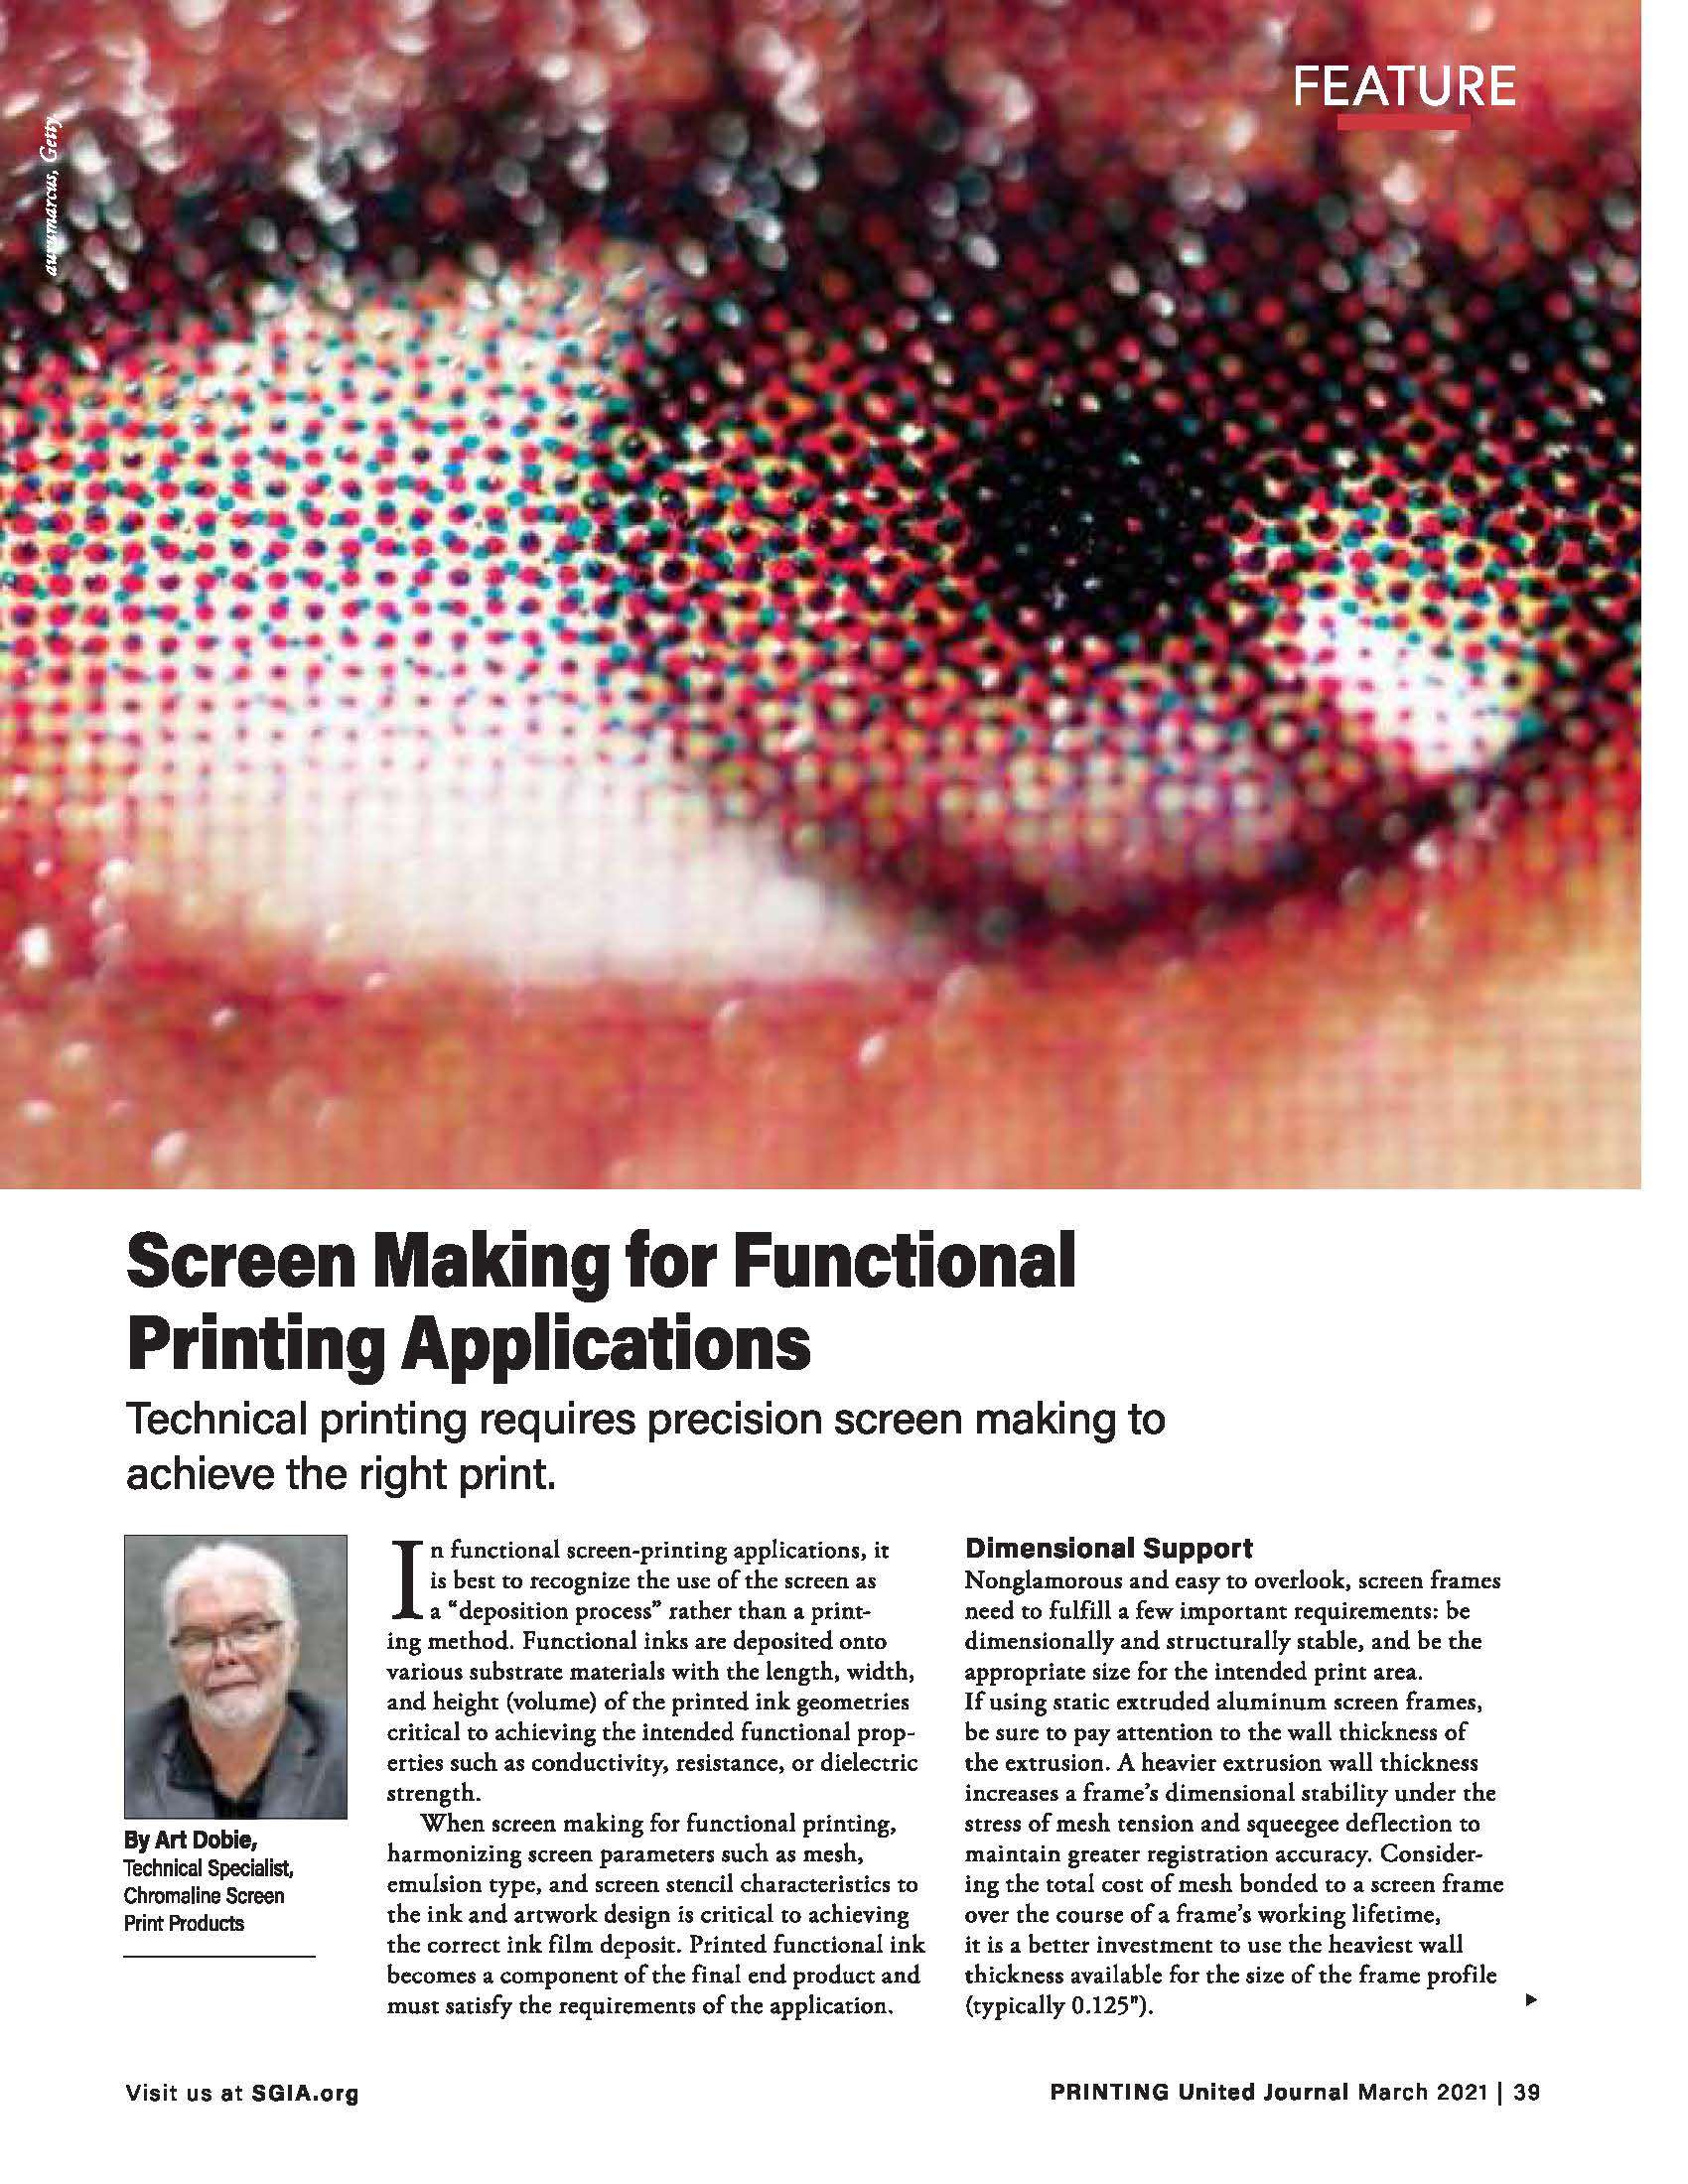 Screen Making for Functional Printing Applications